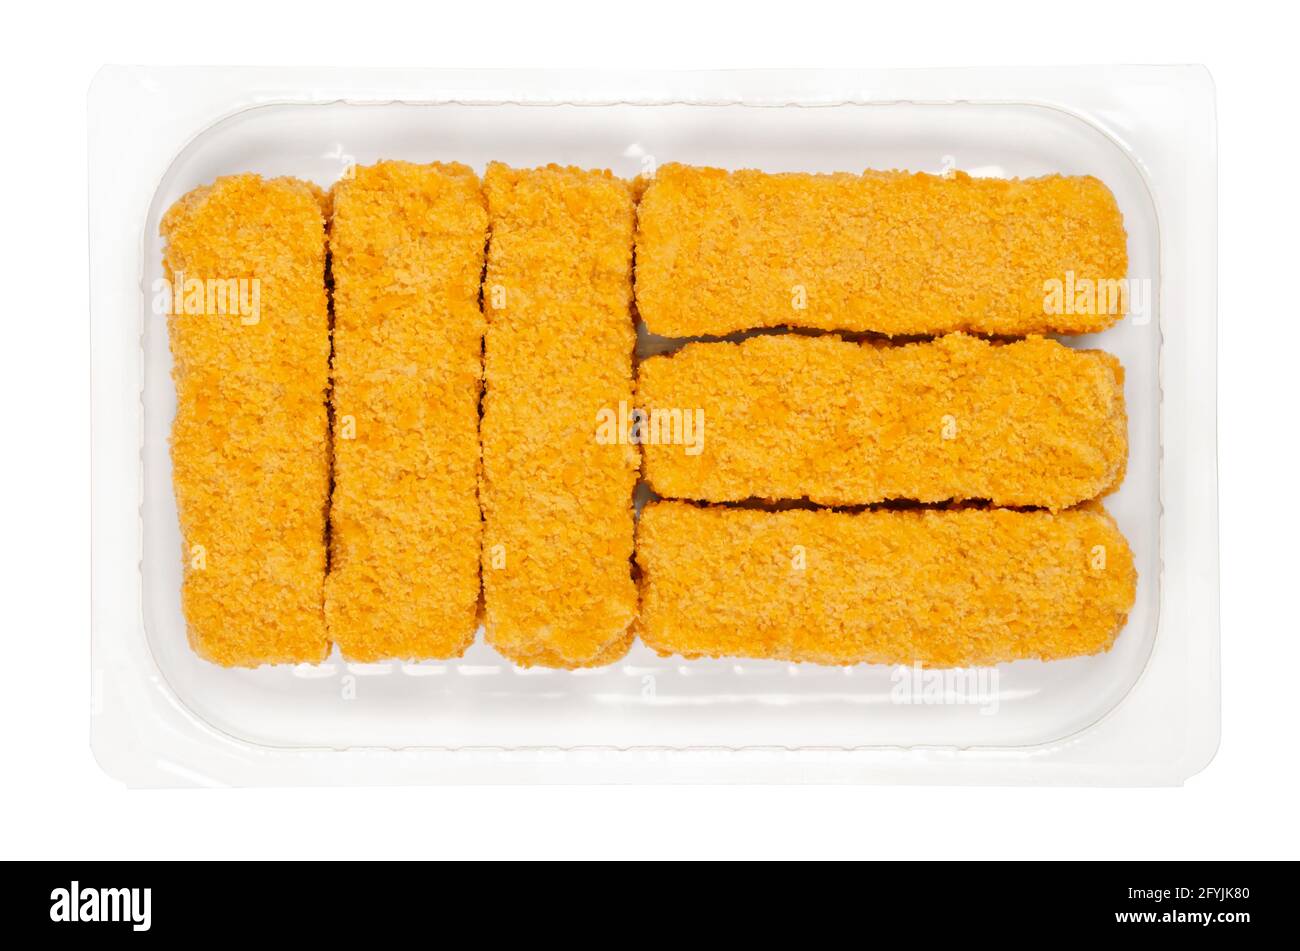 Vegan fish fingers, ready to fry in a clear plastic container. Vegan fish sticks, based on soy protein, in crispy breading, pre-fried and cooked. Stock Photo